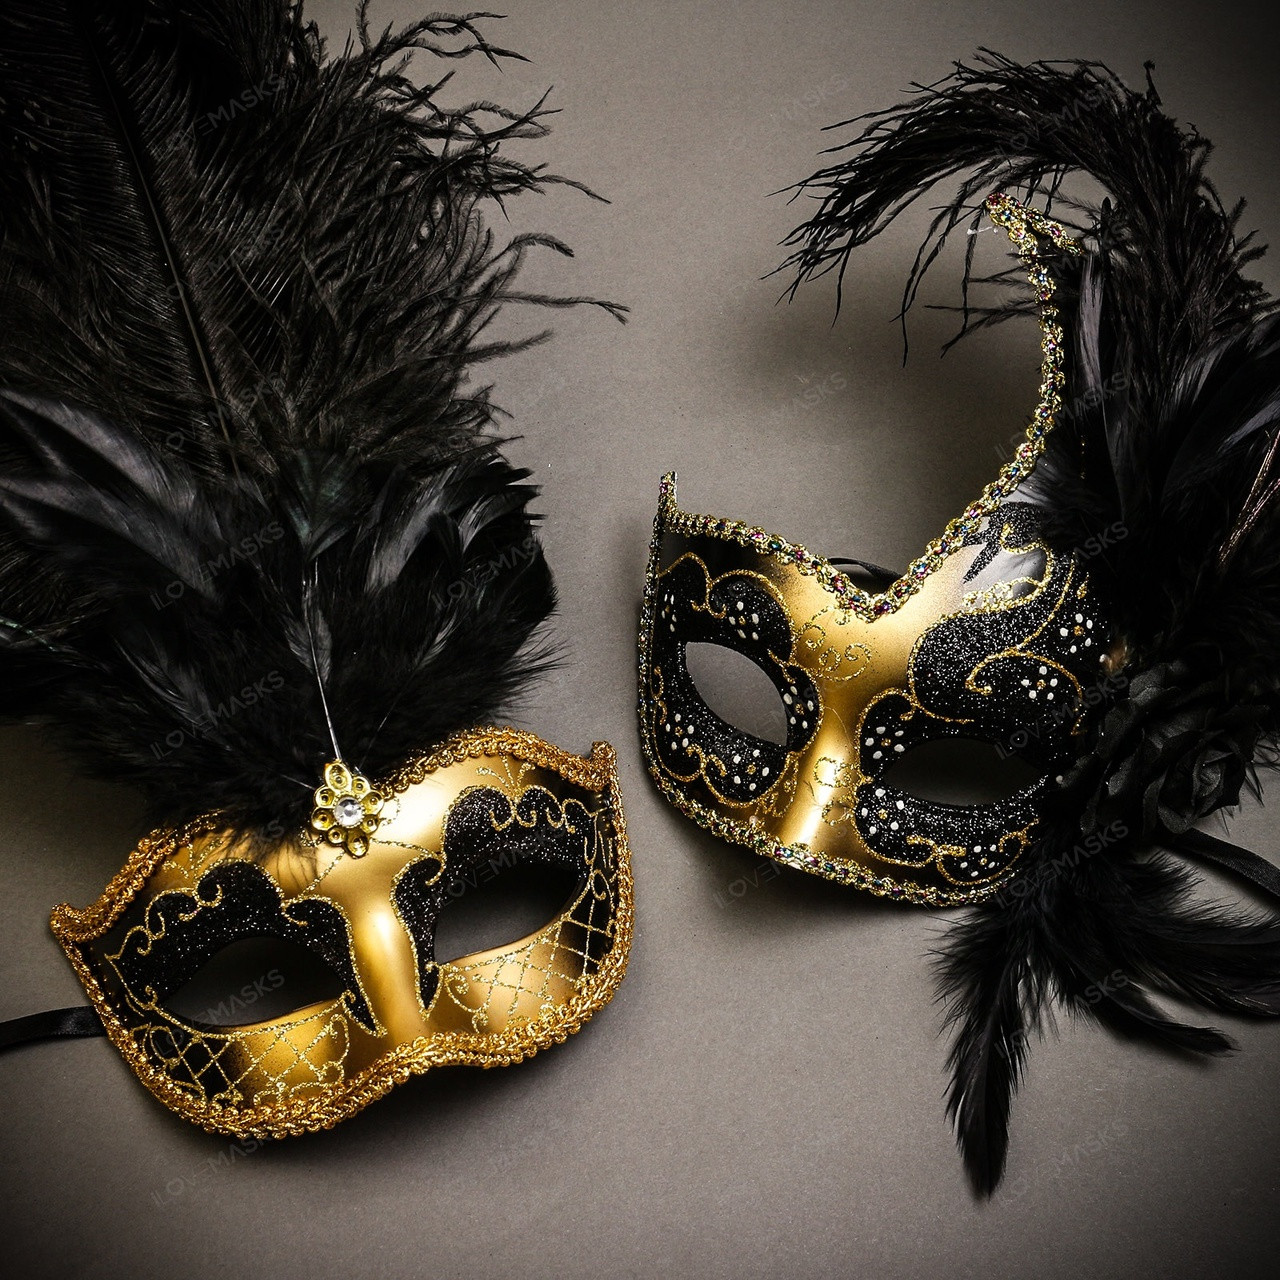 Black Mask with Black Feathers on Side with Black Handle (Each) – Mardi  Gras Spot